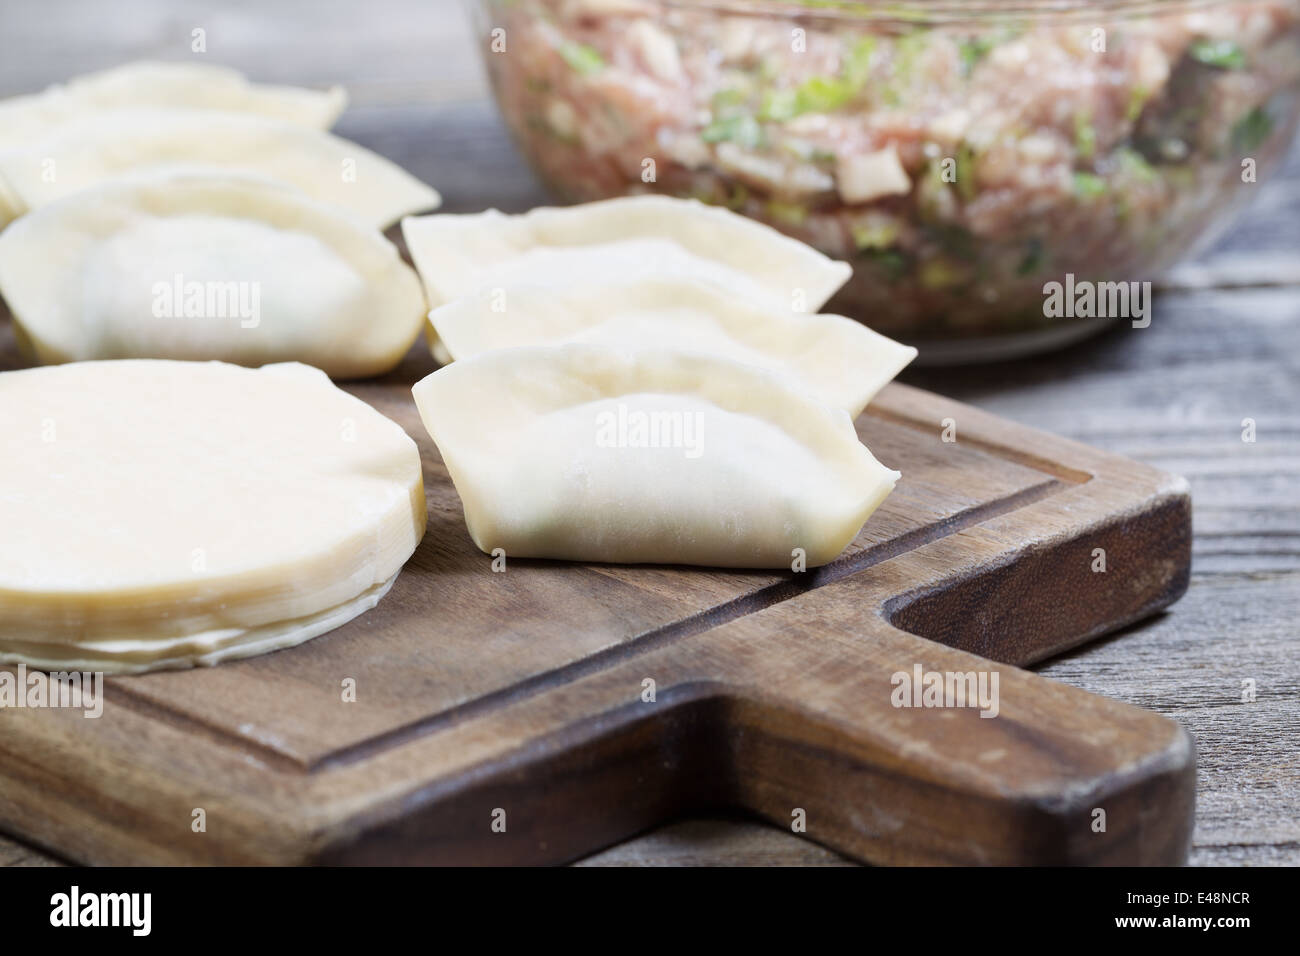 Closeup horizontal photo of homemade traditional Chinese Dumplings in wrappers being made from raw ingredients Stock Photo